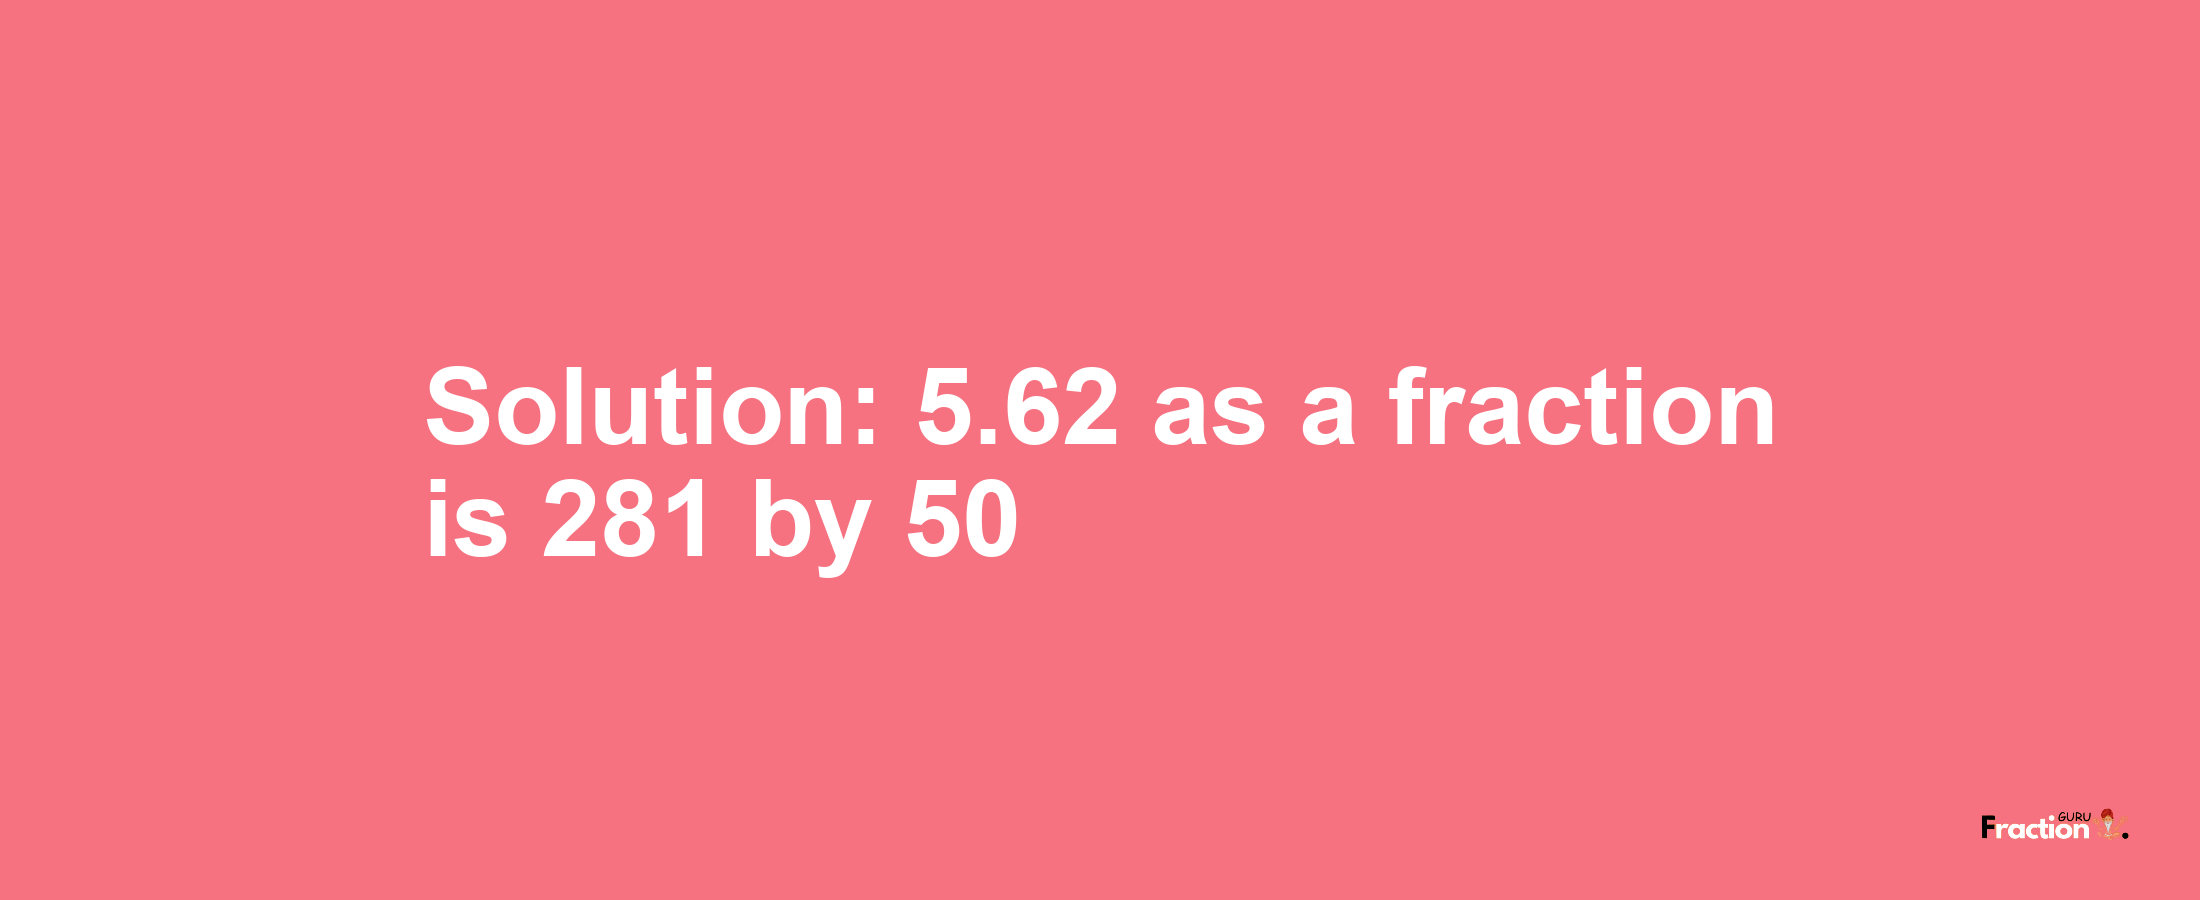 Solution:5.62 as a fraction is 281/50